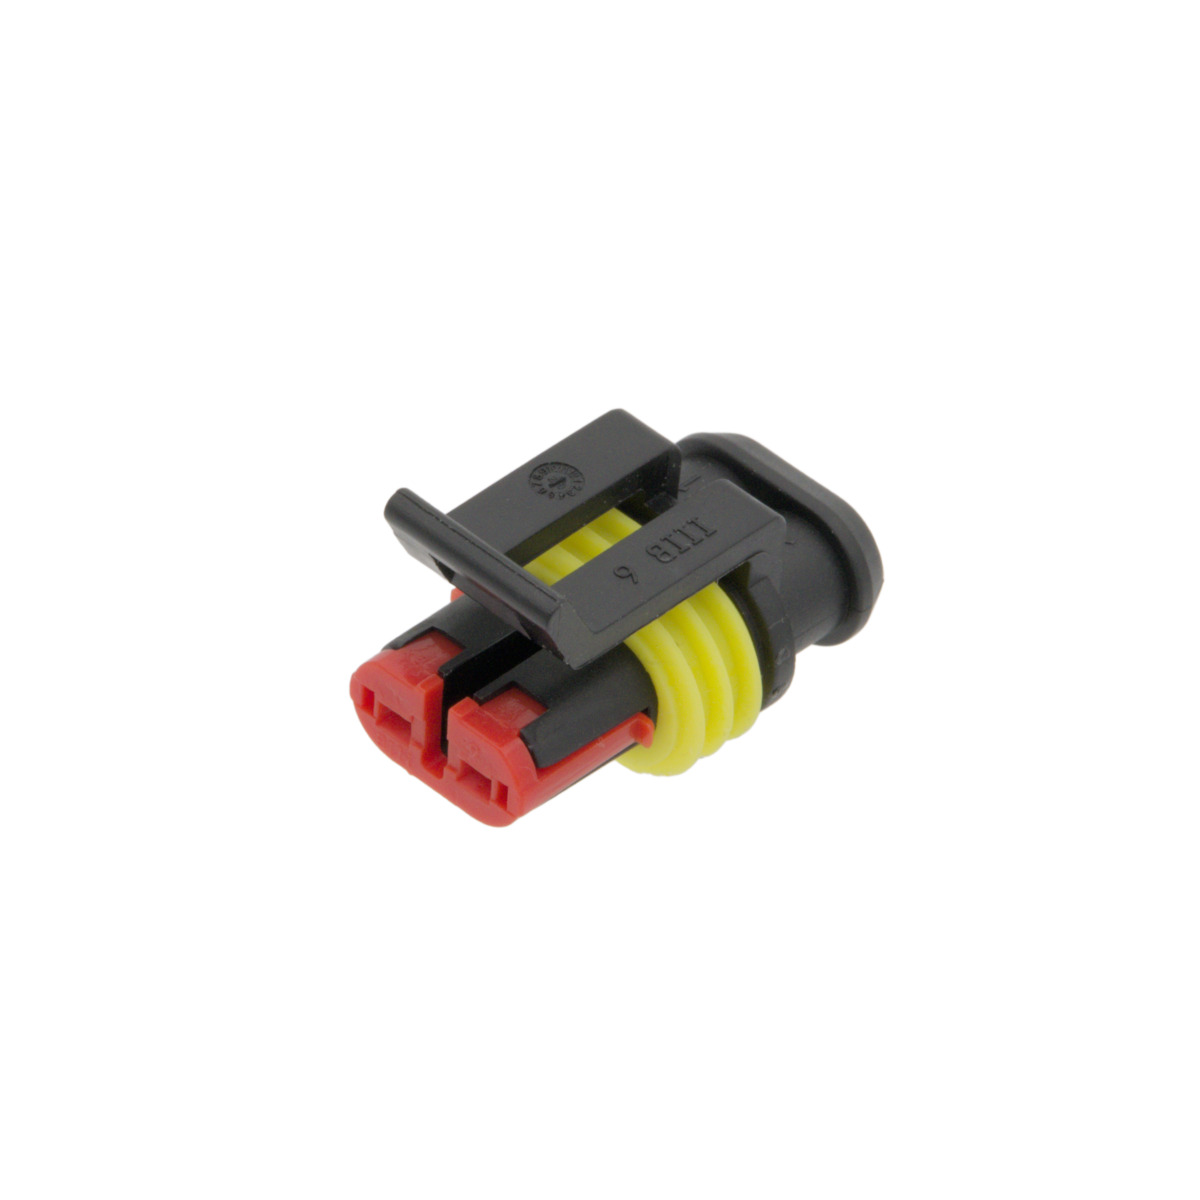 connector SUPERSEAL hembra 2 contacto, Blister 10u.